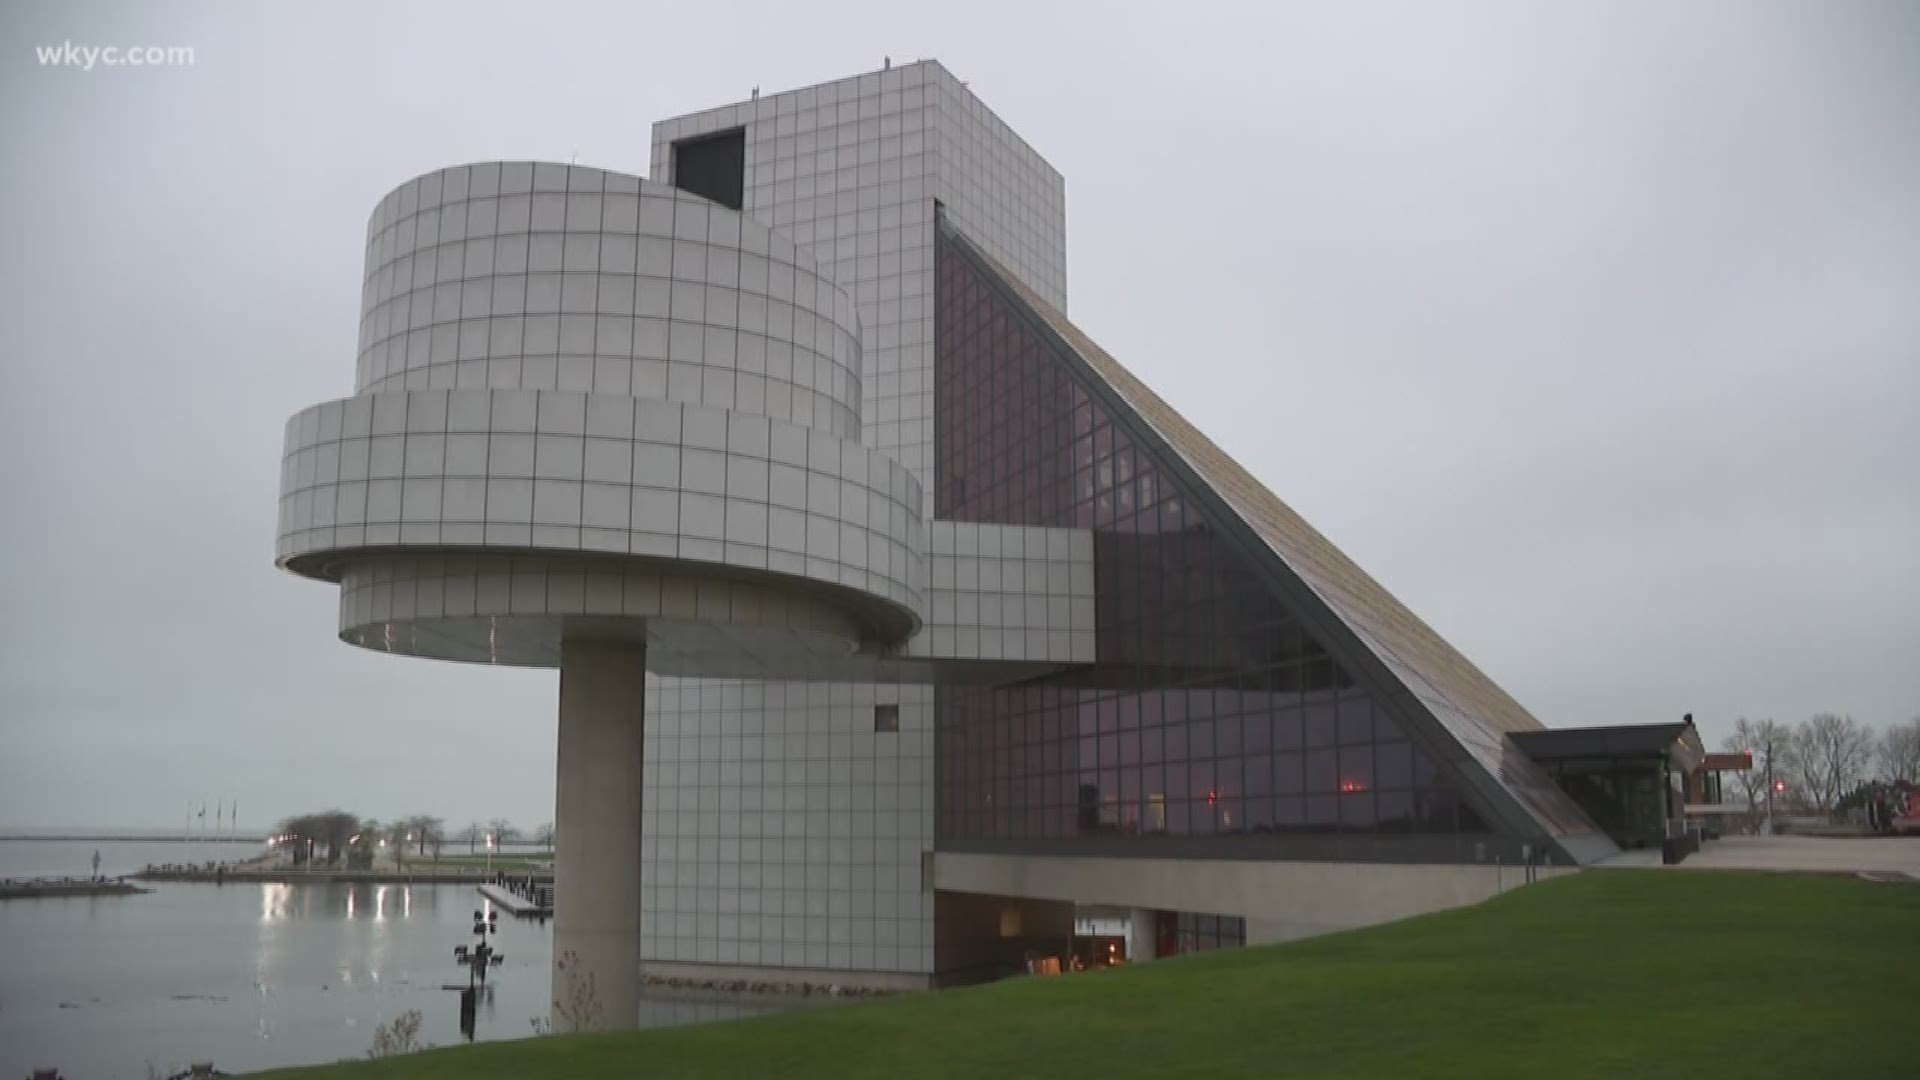 April 30, 2019: Cleveland City Council has approved the Rock and Roll Hall of Fame’s proposal for a $35 million expansion that will connect the building to the Great Lakes Science Center. Aside from an indoor walkway between both museums, the 50,000 square foot expansion will also include more space for exhibits and classrooms.